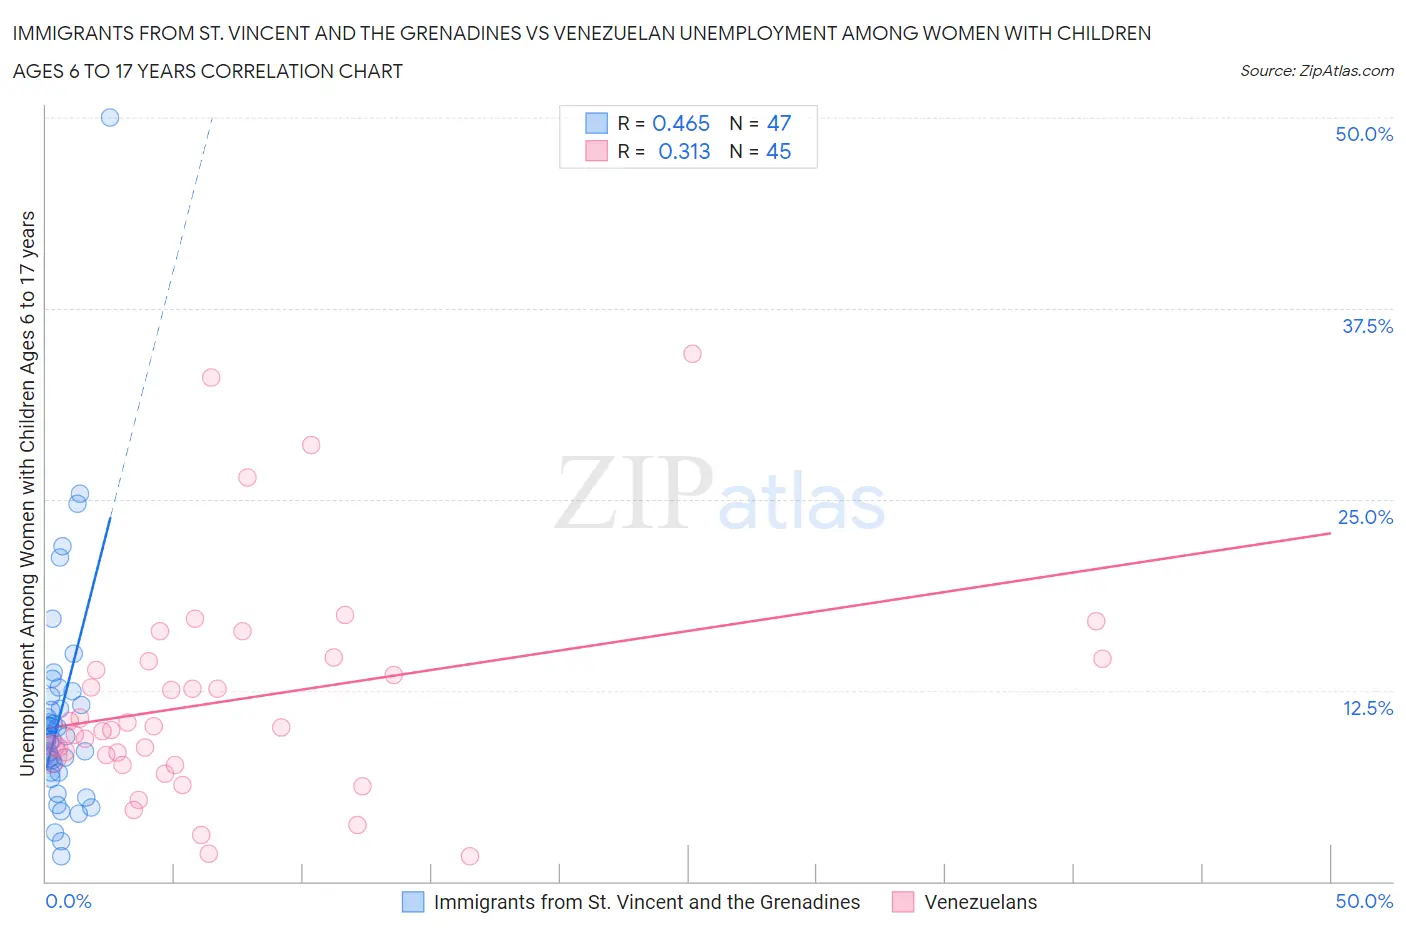 Immigrants from St. Vincent and the Grenadines vs Venezuelan Unemployment Among Women with Children Ages 6 to 17 years